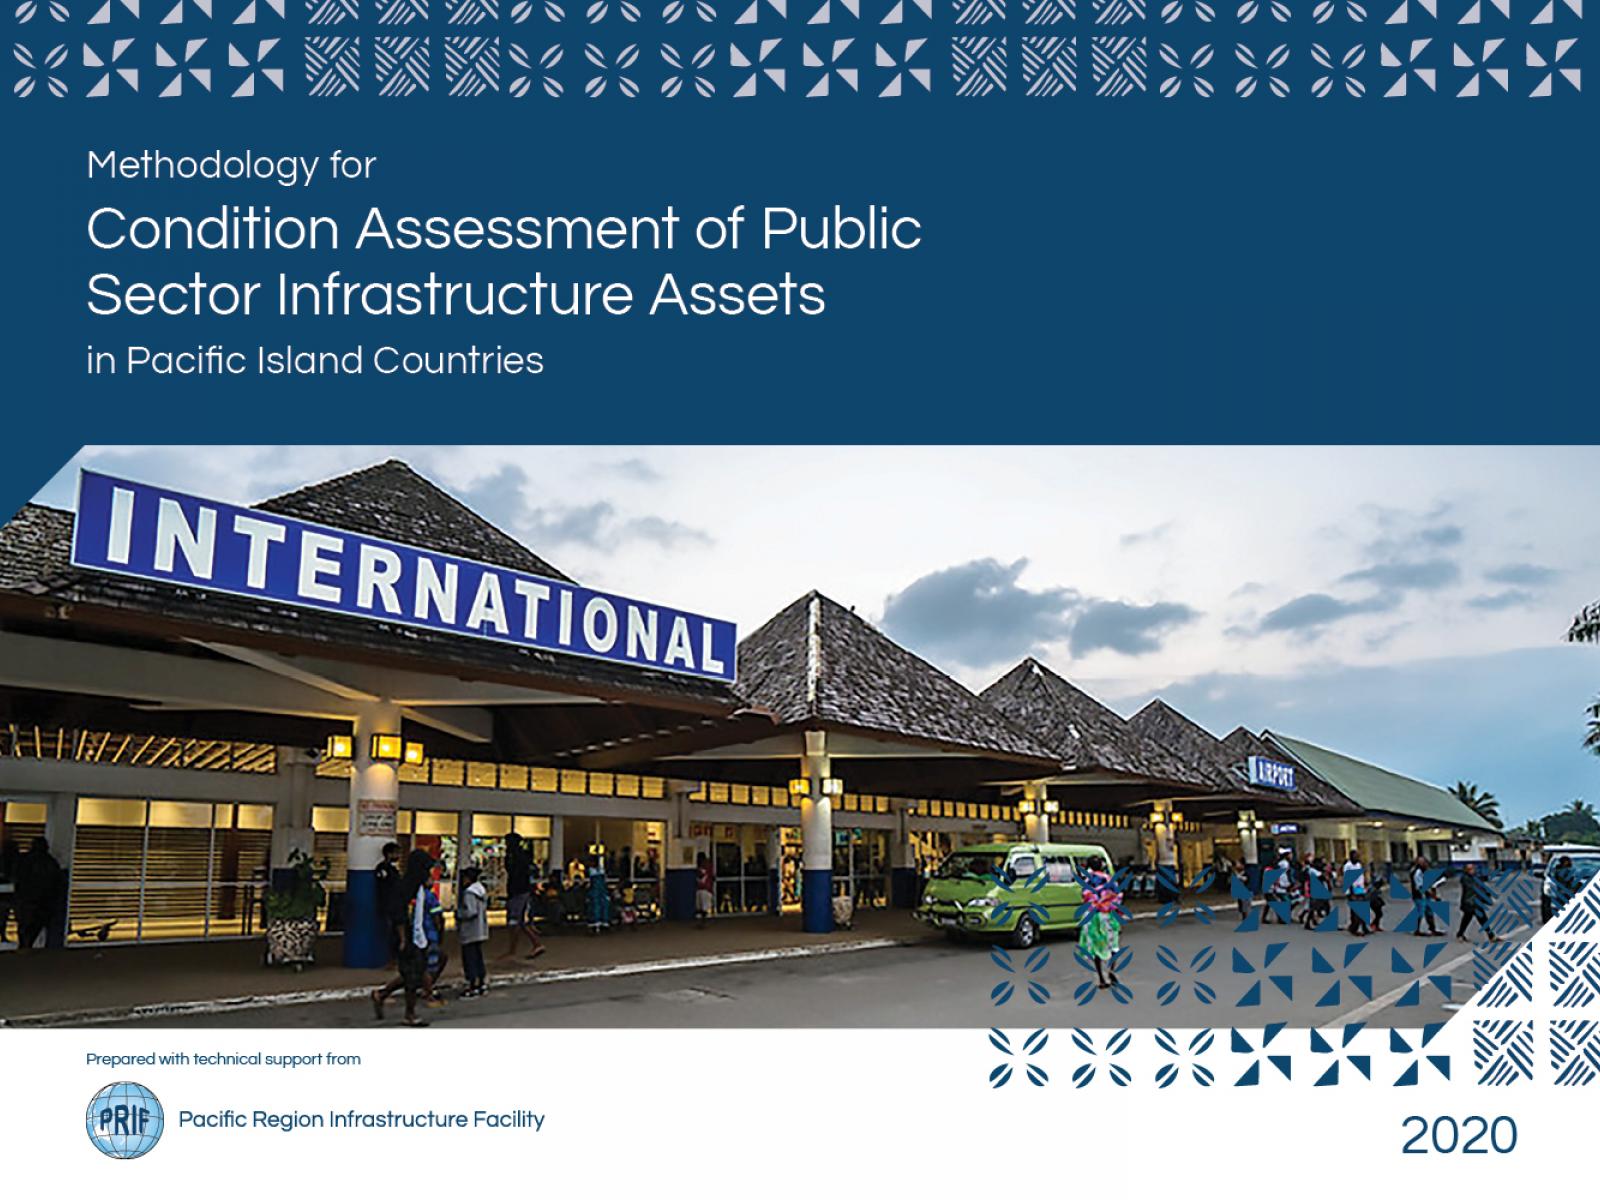 Methodology for Condition Assessment of Public Sector Infrastructure Assets in Pacific Island Countries